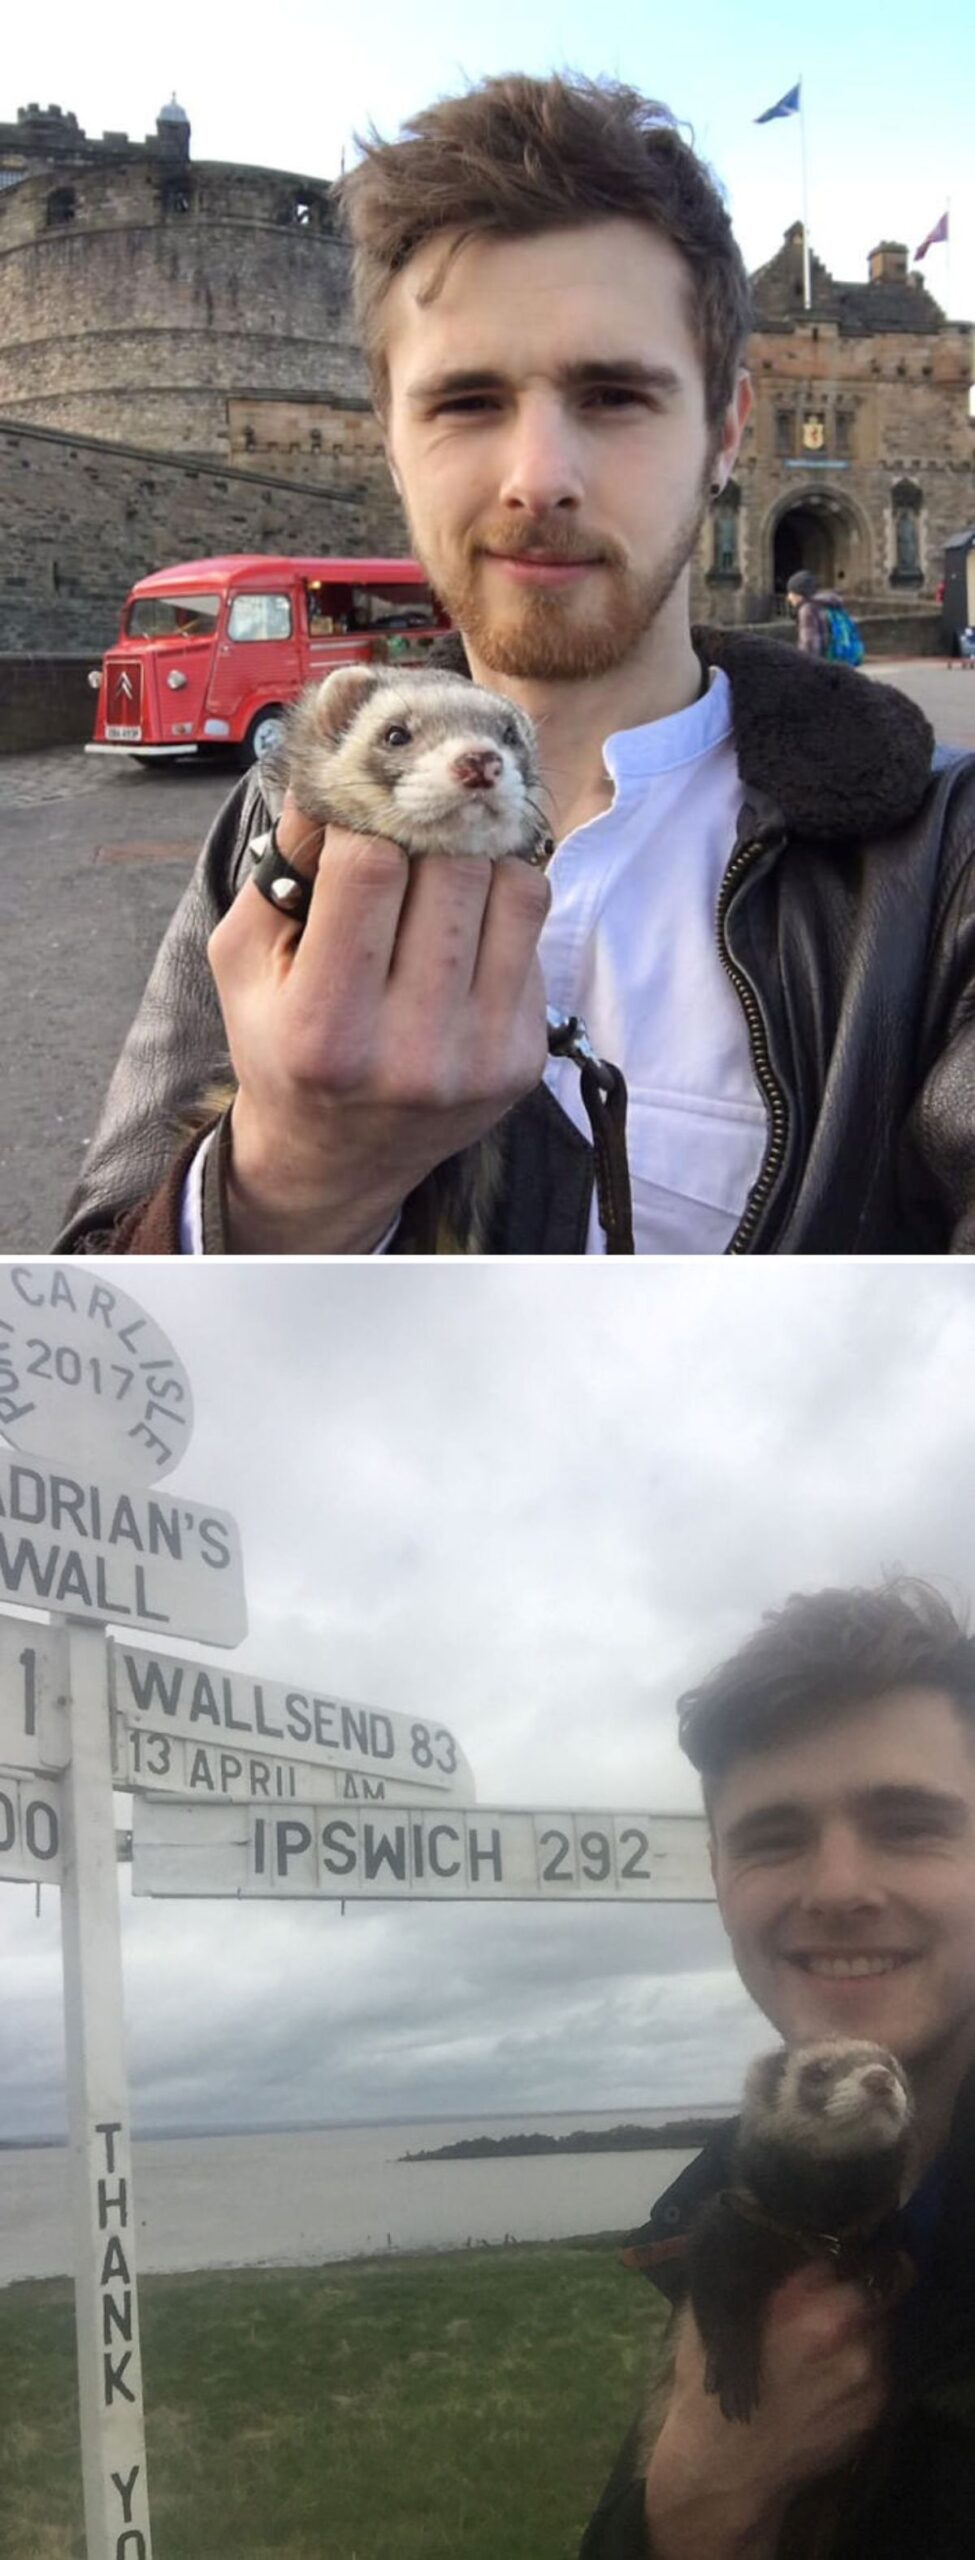 2 photos of black and white ferret being held by a man